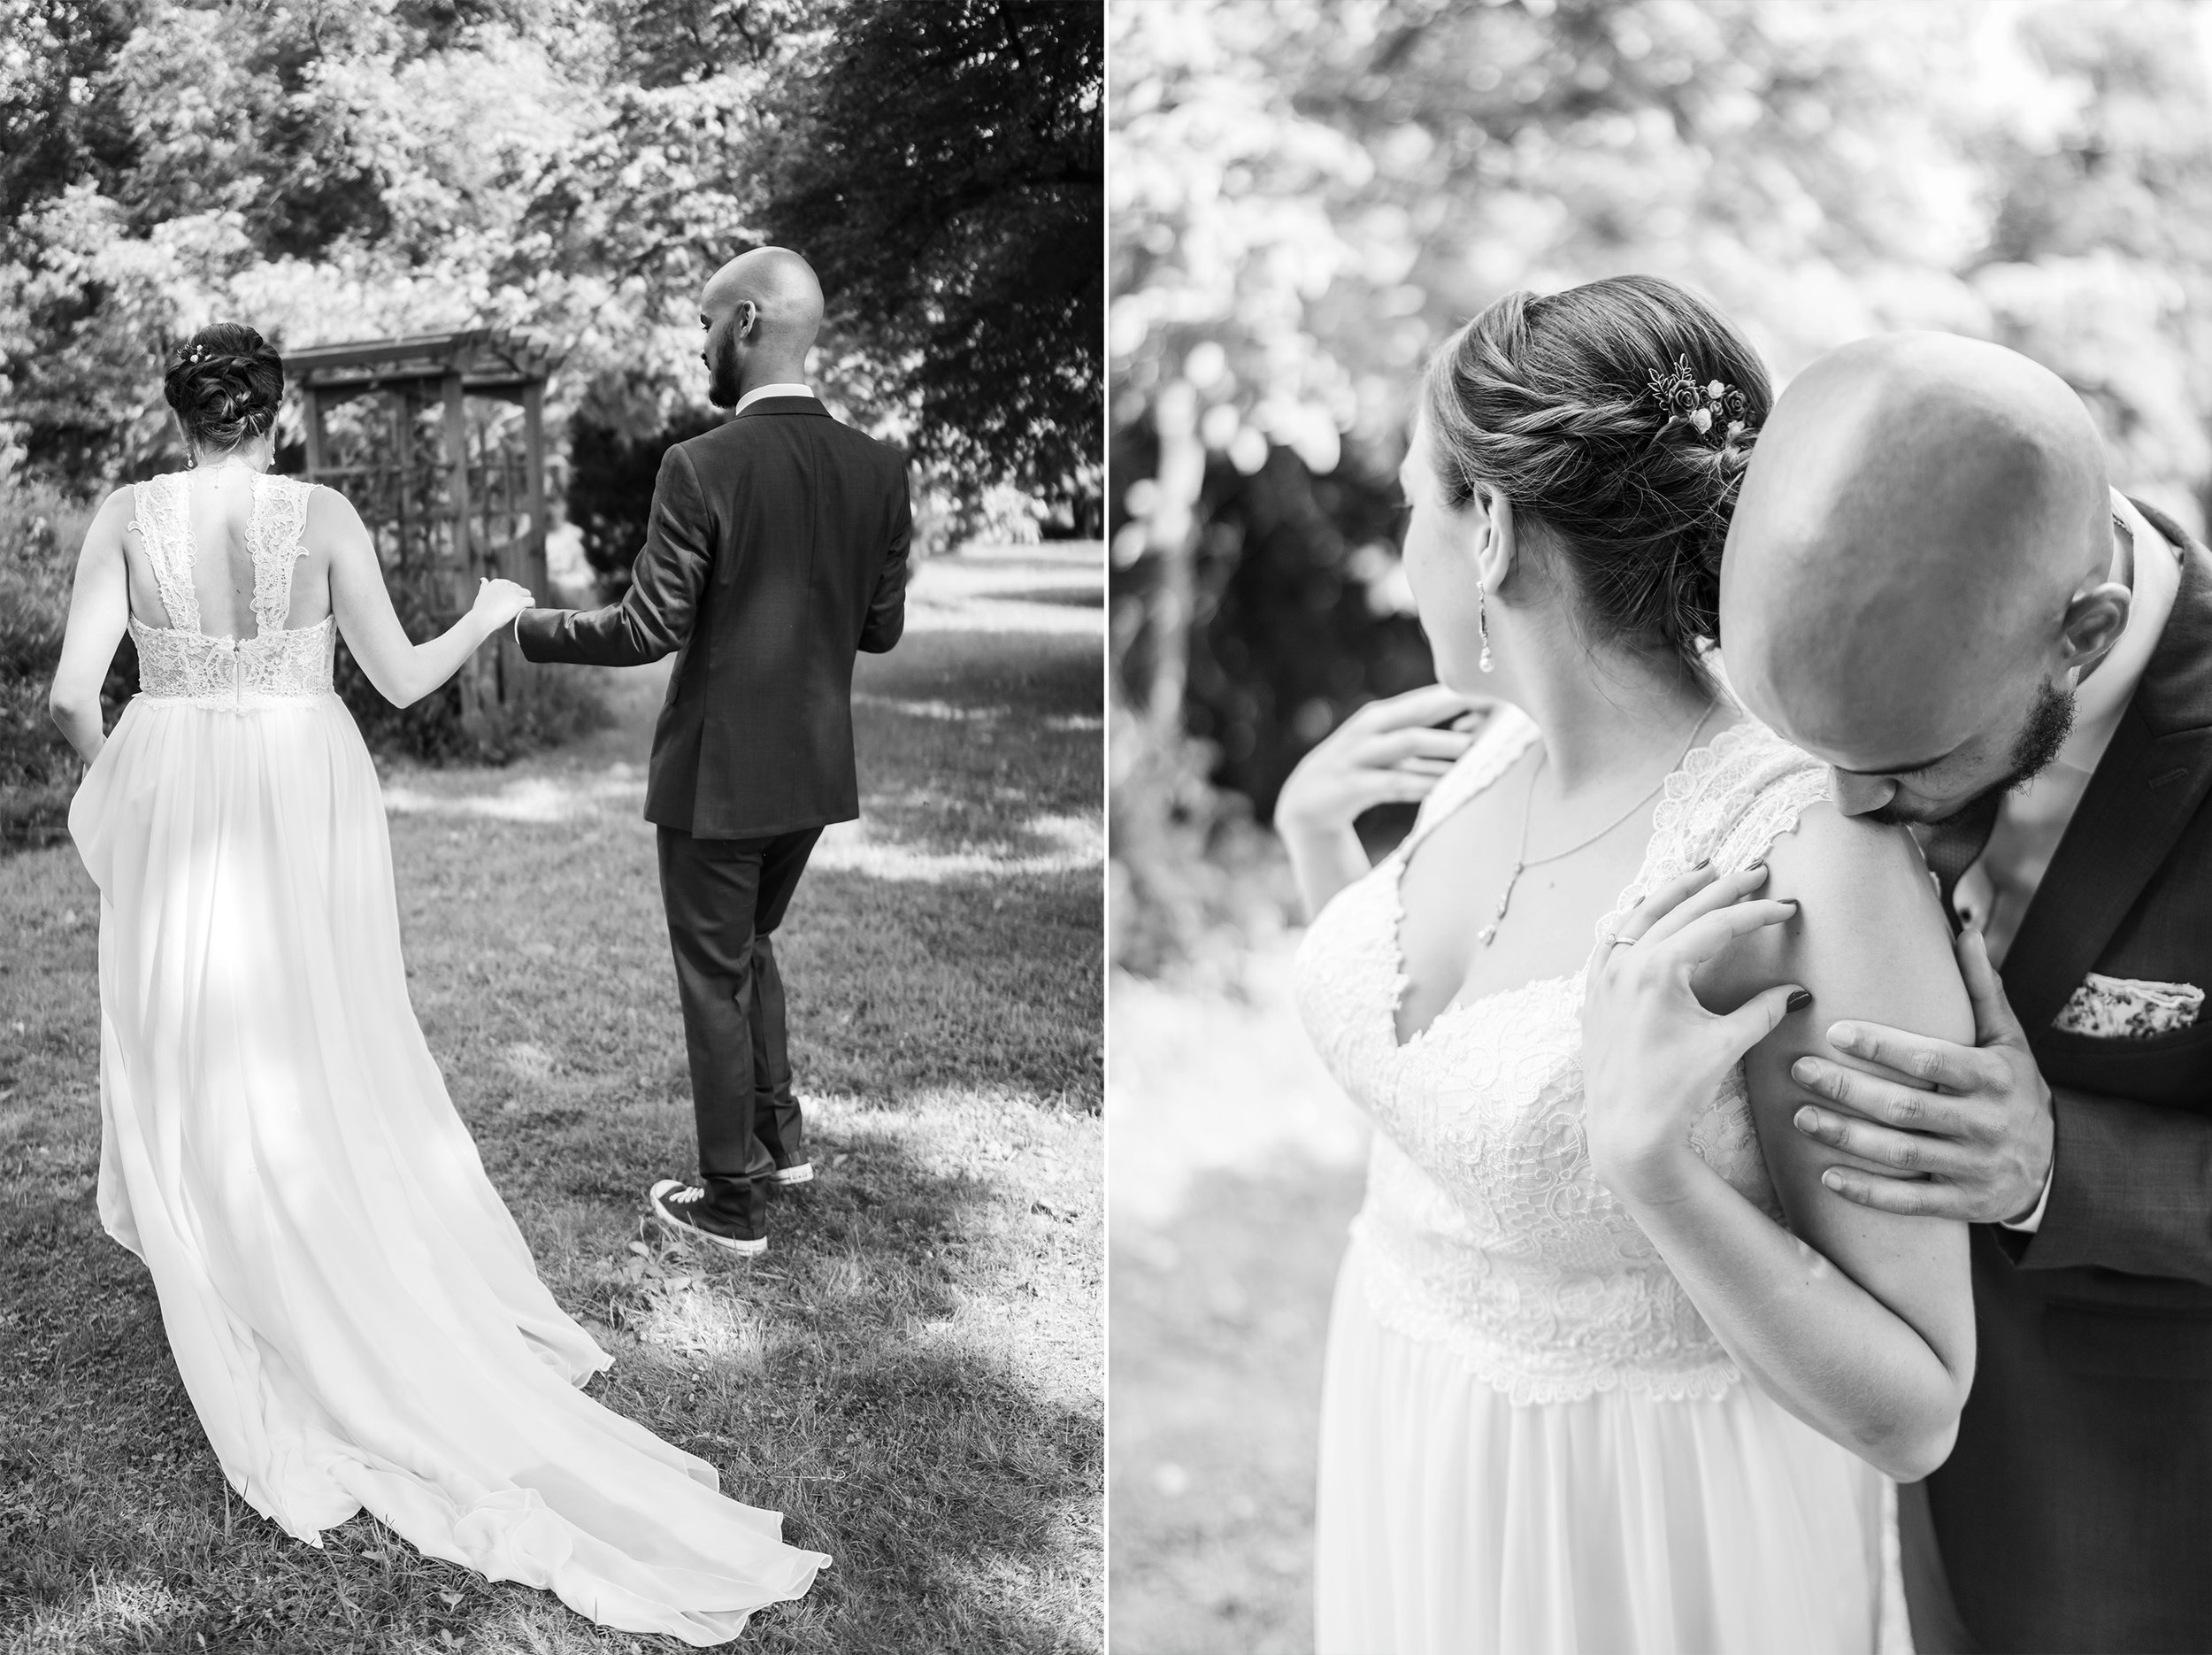 Romantic wedding portraits in black and white at Rust Manor House wedding